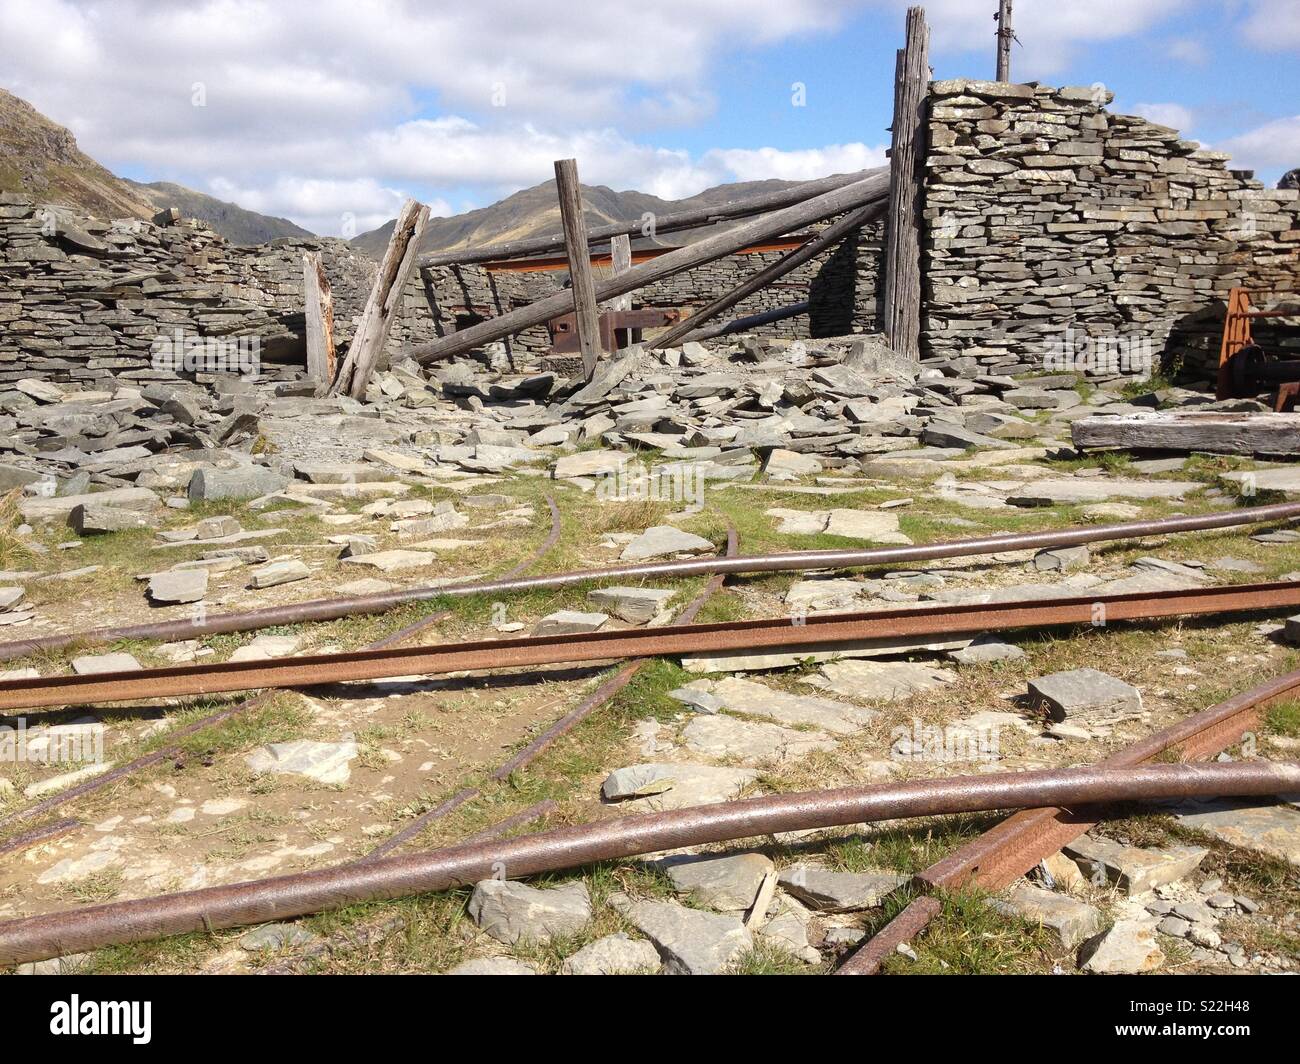 Abandoned metal work structures on mountain Stock Photo